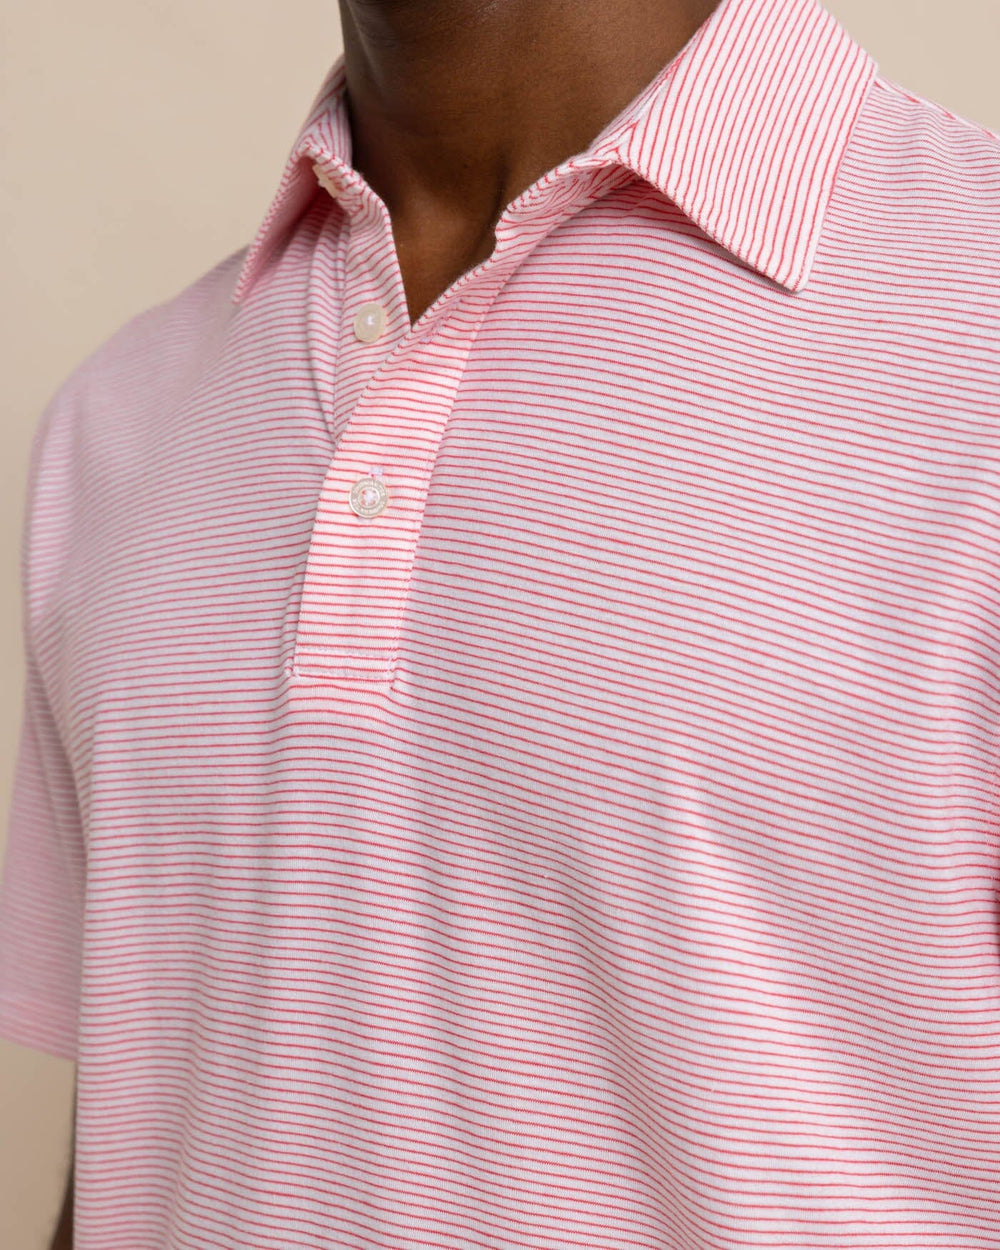 The detail view of the Southern Tide The Seaport Davenport Stripe Polo by Southern Tide - Teaberry Pink